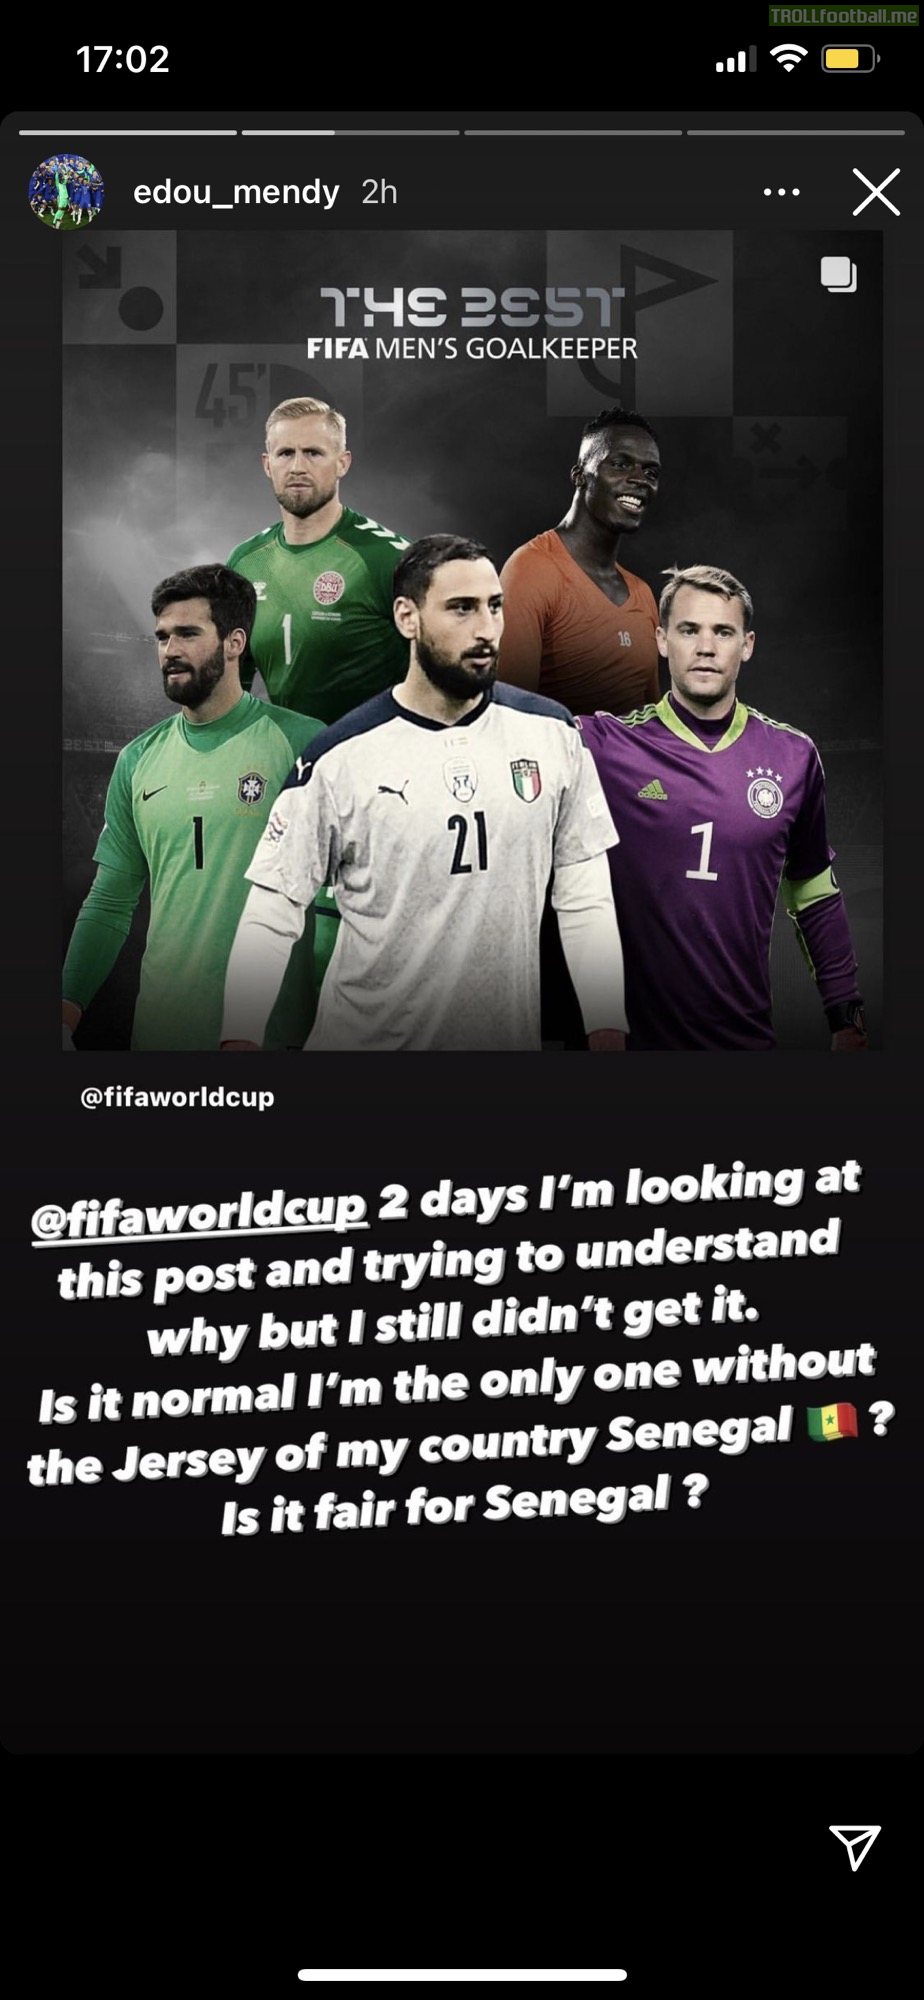 [Instagram] Edouard Mendy: 2 days I'm looking at this post and trying to understand why but I still didn't get it. Is it normal I'm the only one without the Jersey of my country Senegal 🇸🇳? Is it fair for Senegal?